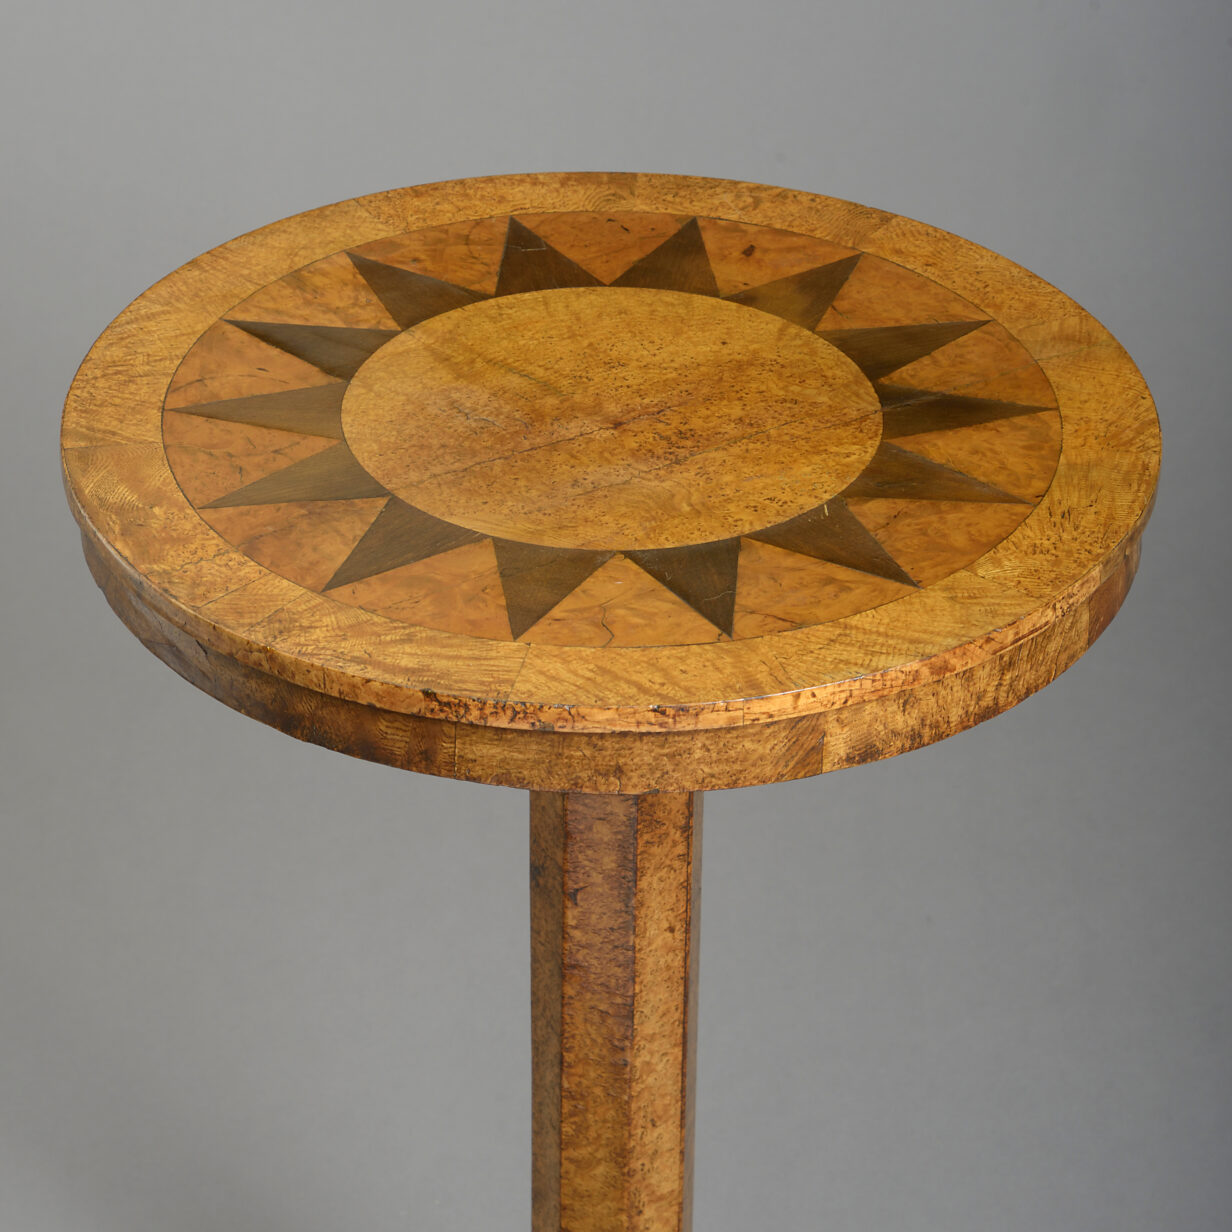 Early 19th century regency period occasional table